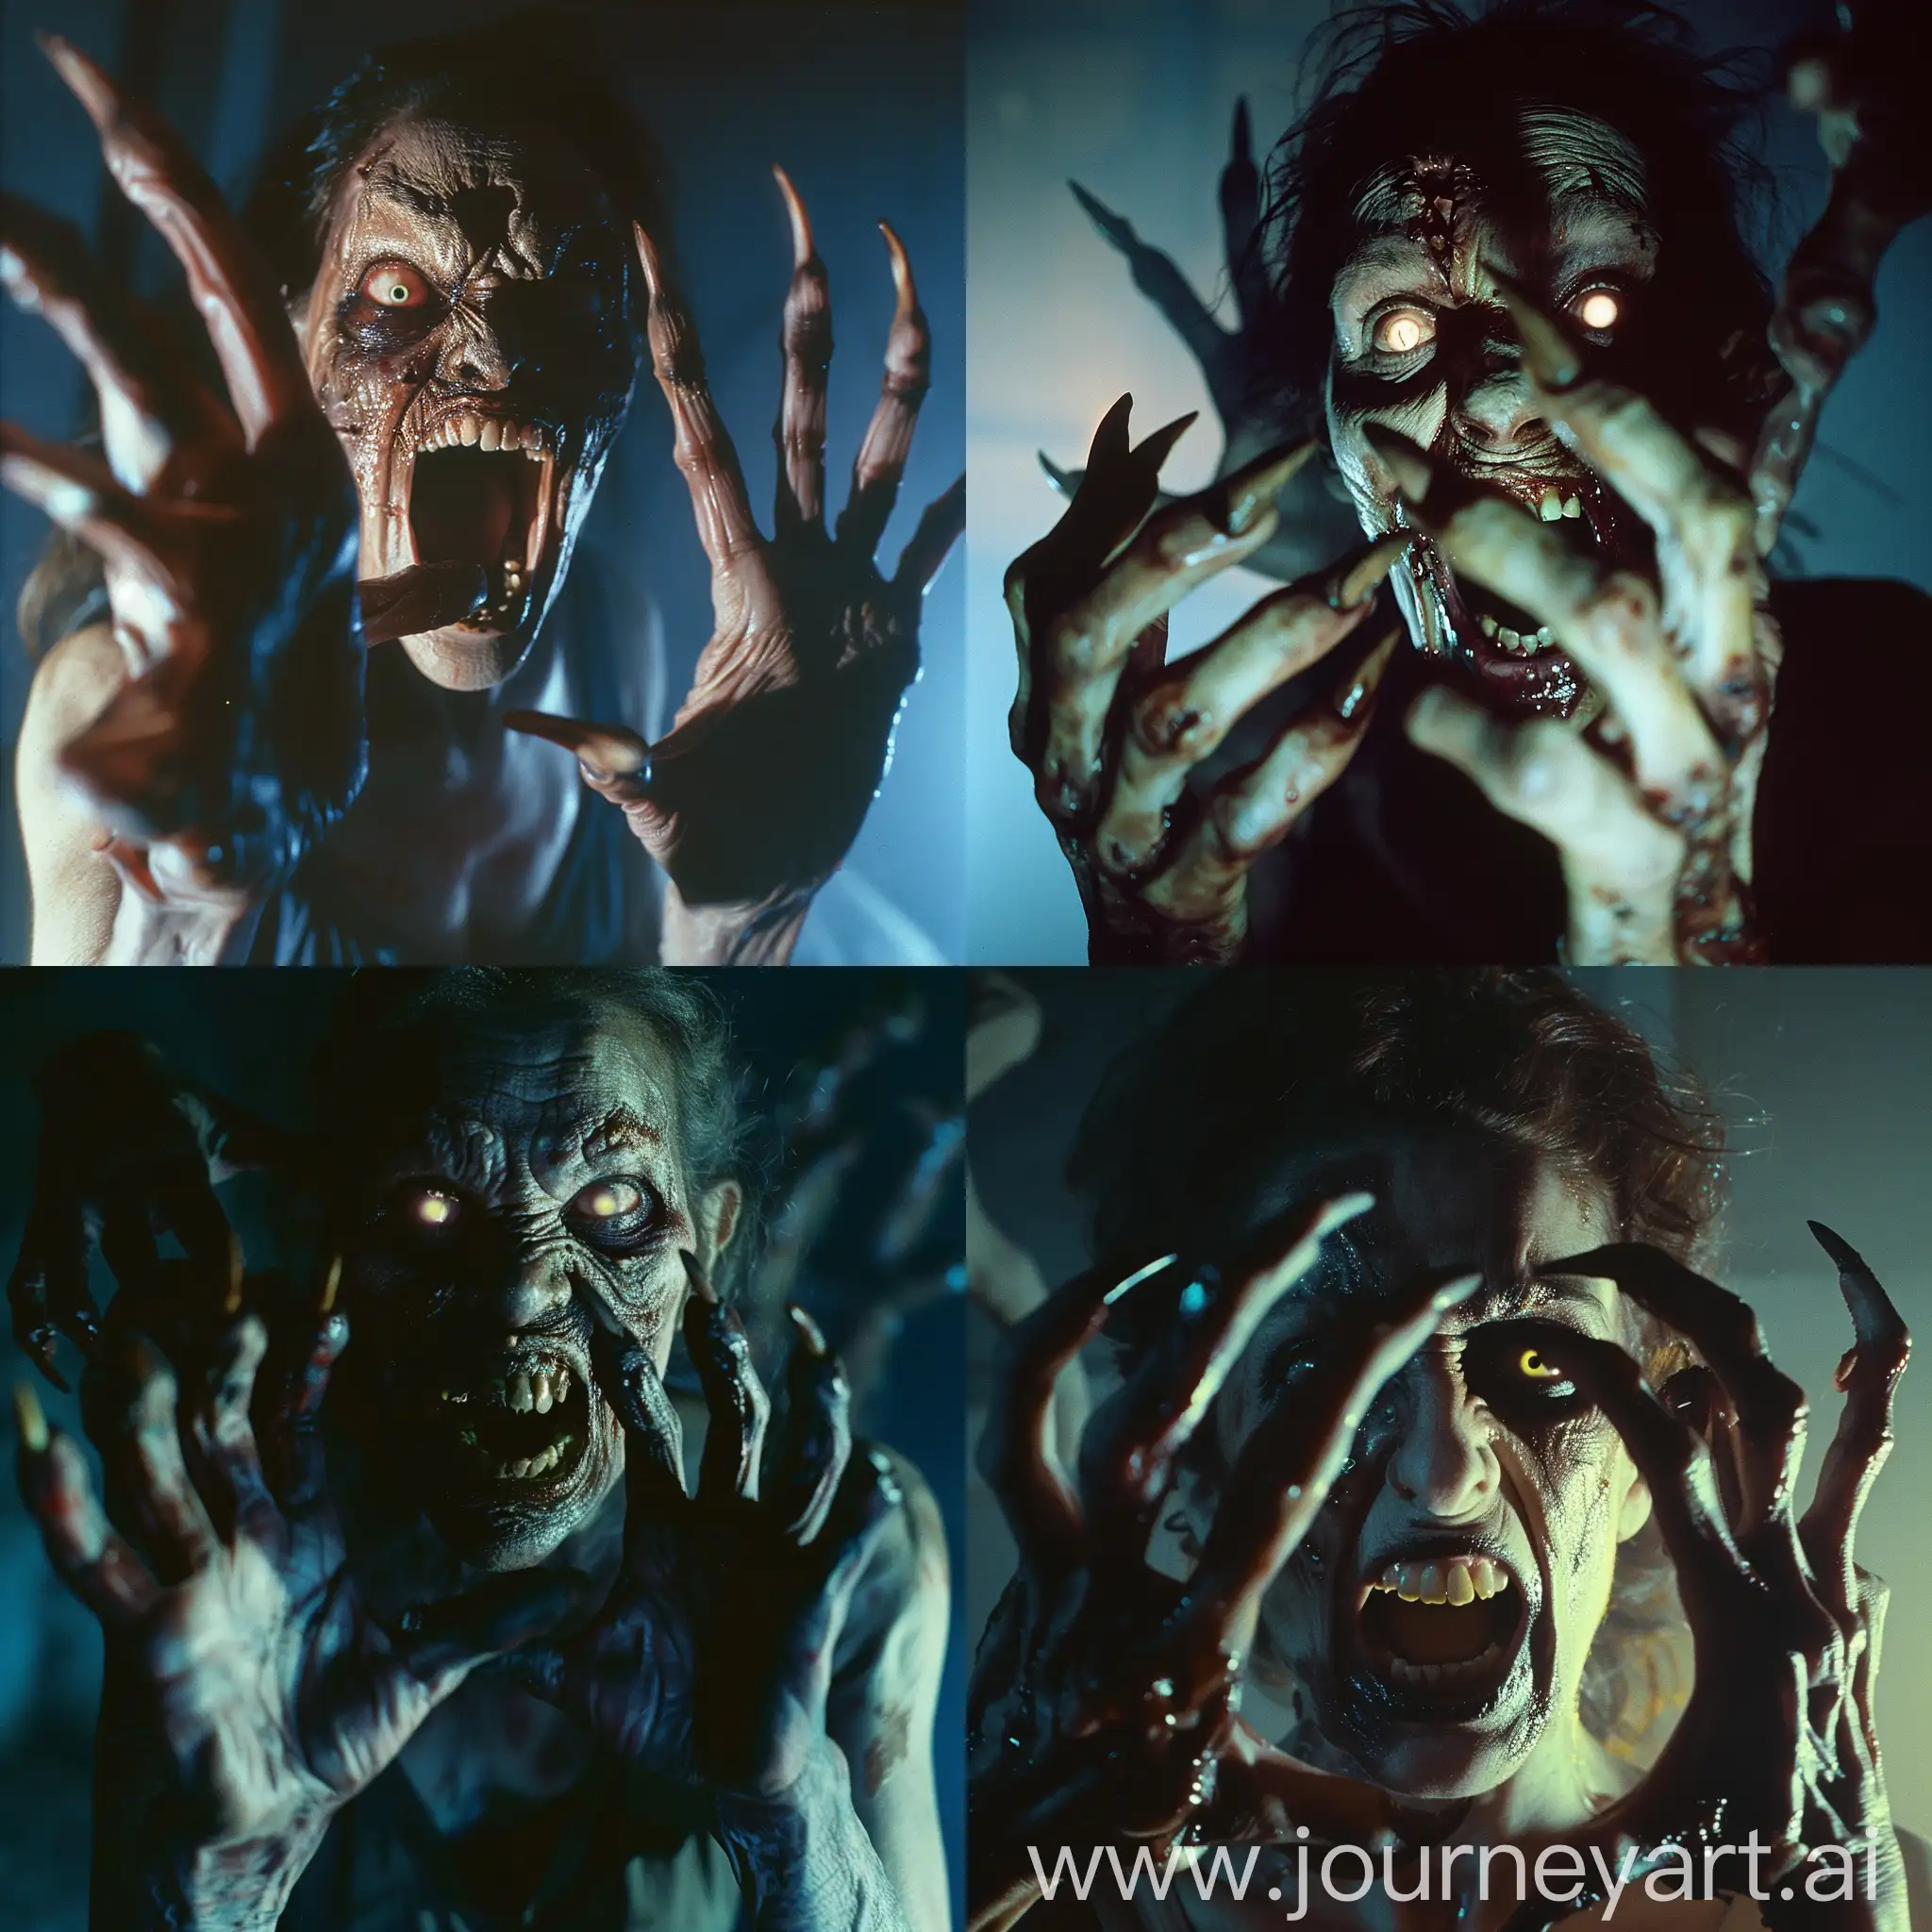 A zombie woman with a terrifyingly hungry and ugly expression, her sunken eyes glowing eerily in the darkness. Her long, curved, pointed dirty nails protrude from her five fingers like menacing claws, adding to her threatening demeanor. The camera captures her mouth in a threateningly open position, revealing a mouthful of pointed teeth resembling fangs. The dark, full anatomical human hands in the background are in a very dynamic pose, giving the image a sense of movement and tension. The setting is at night, with only a faint glow illuminating the scene, further enhancing the ominous and foreboding atmosphere. The zombie woman stands out against the dark background, her clawed fingers and gnashing teeth emphasizing her monstrous and hungry nature., old VHS footage, horror, chromatic aberrations, muted color grading.